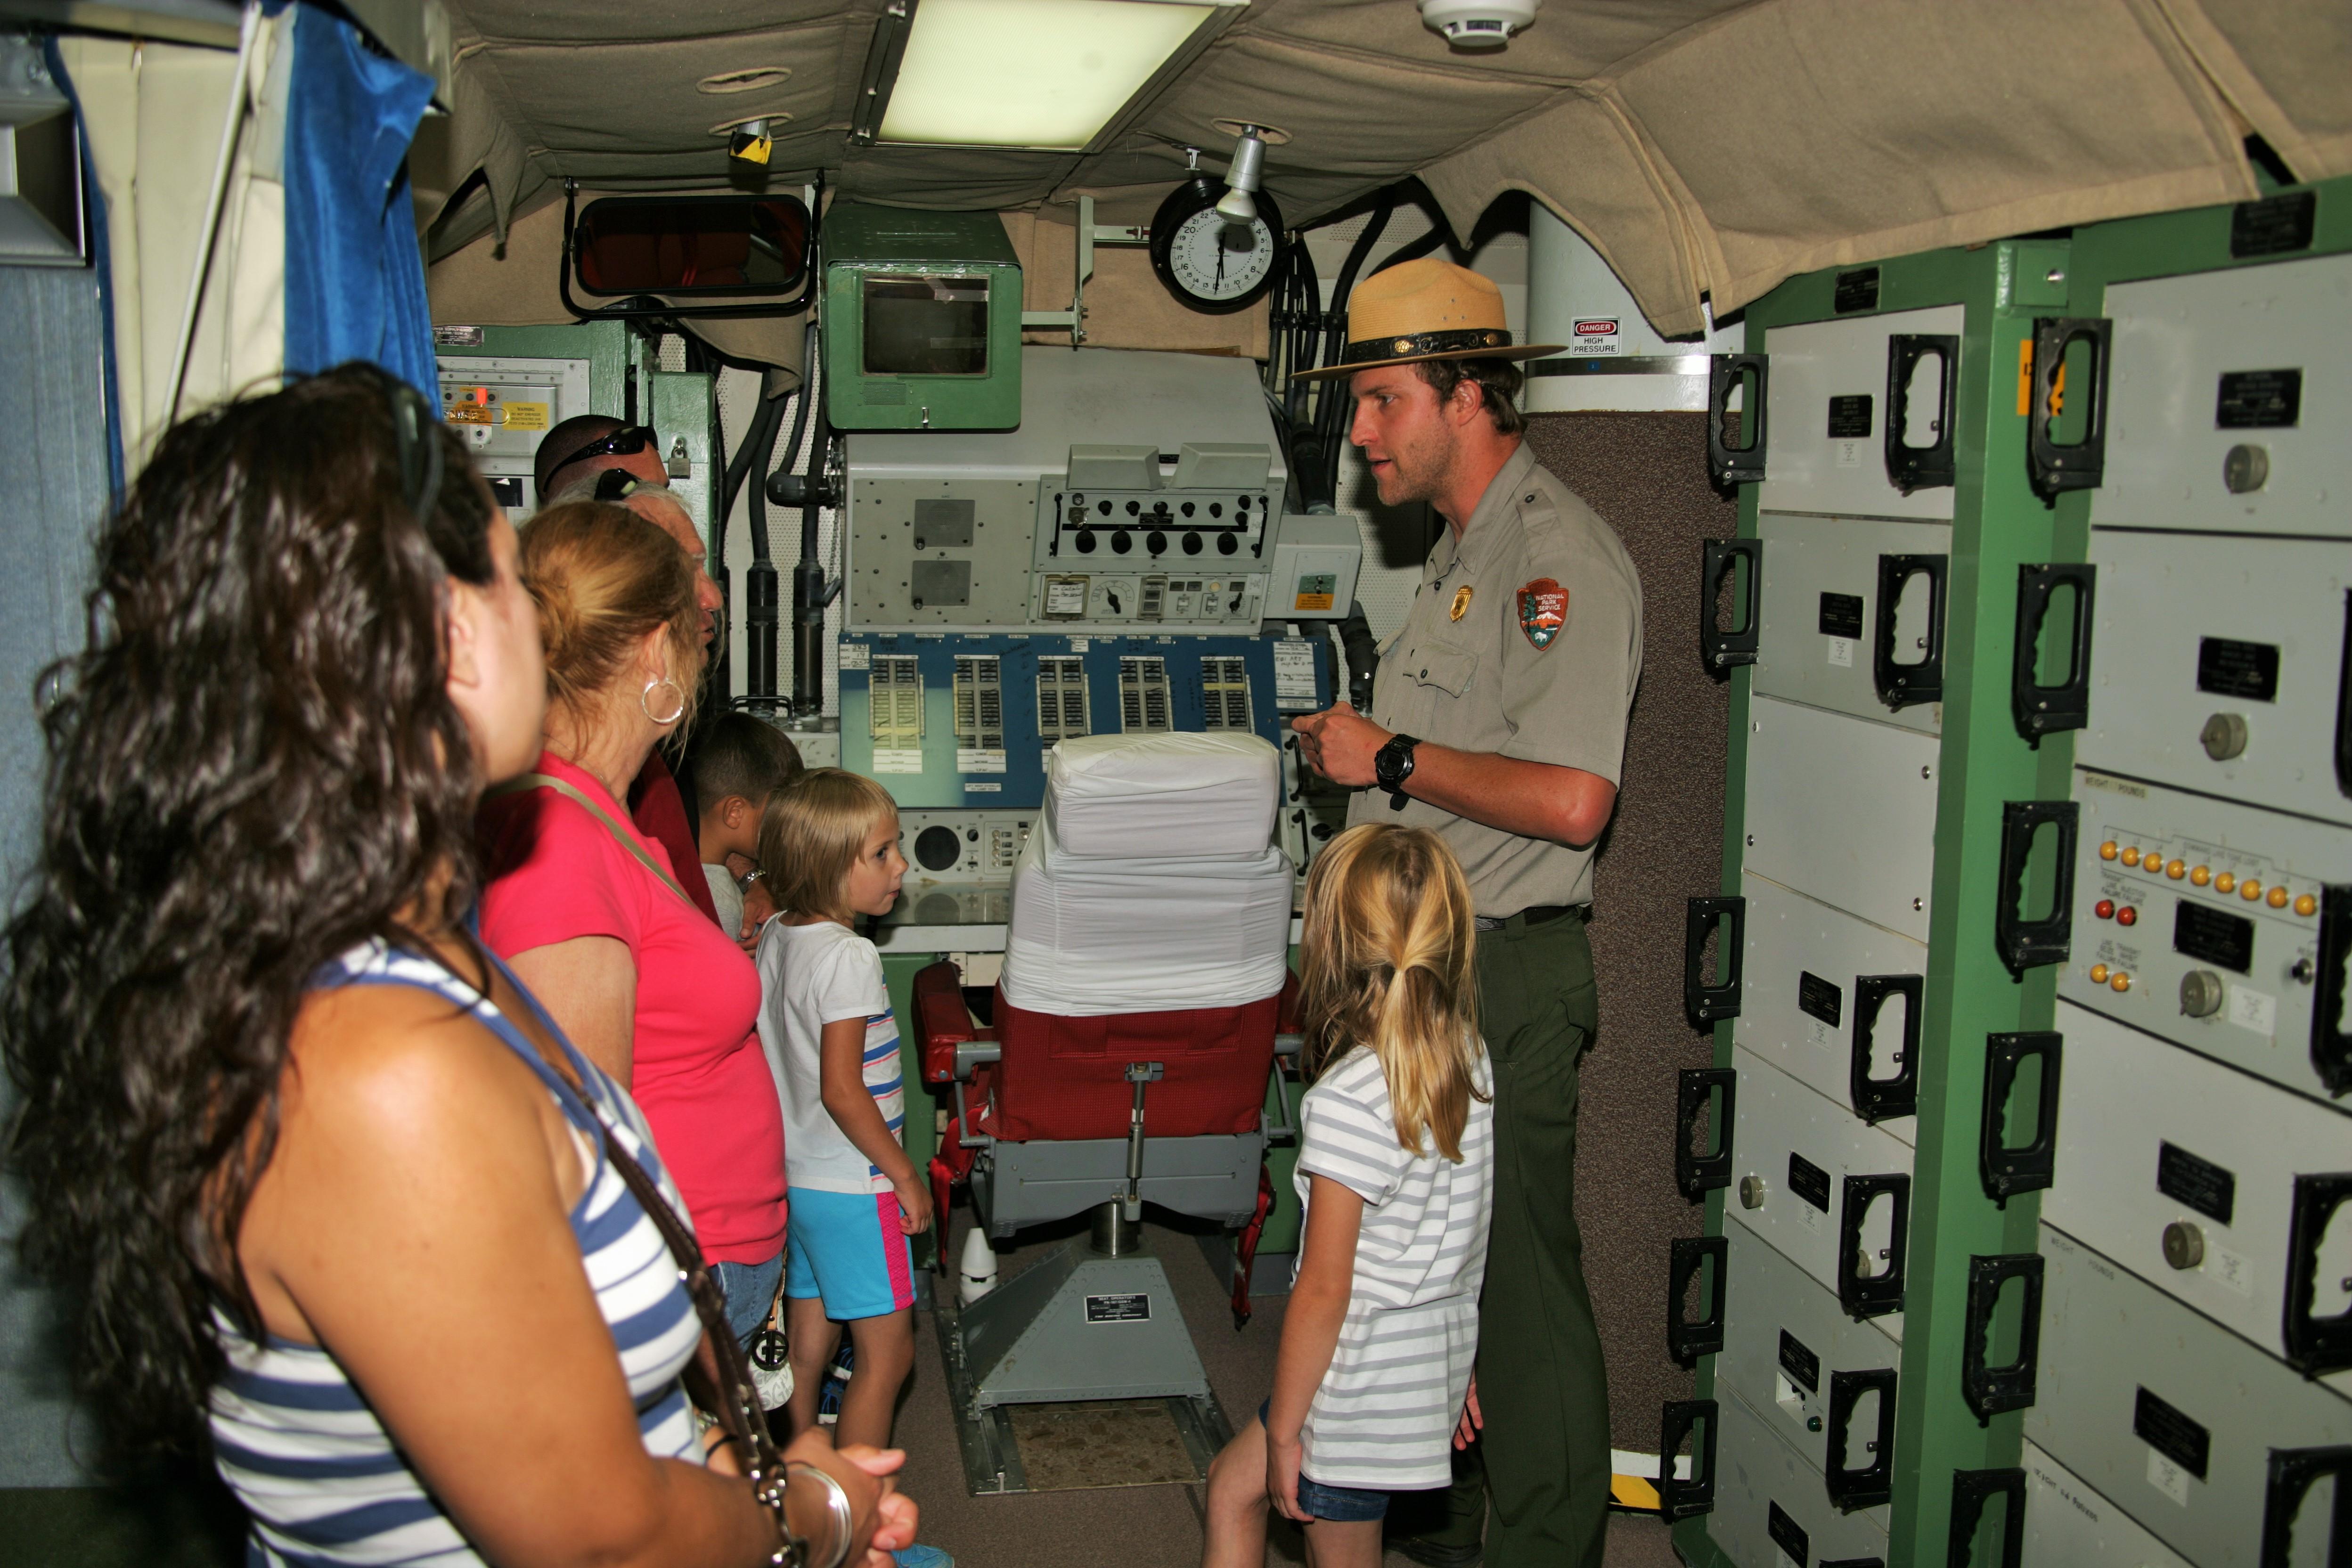 A ranger talks to visitors next to electronic cabinets.